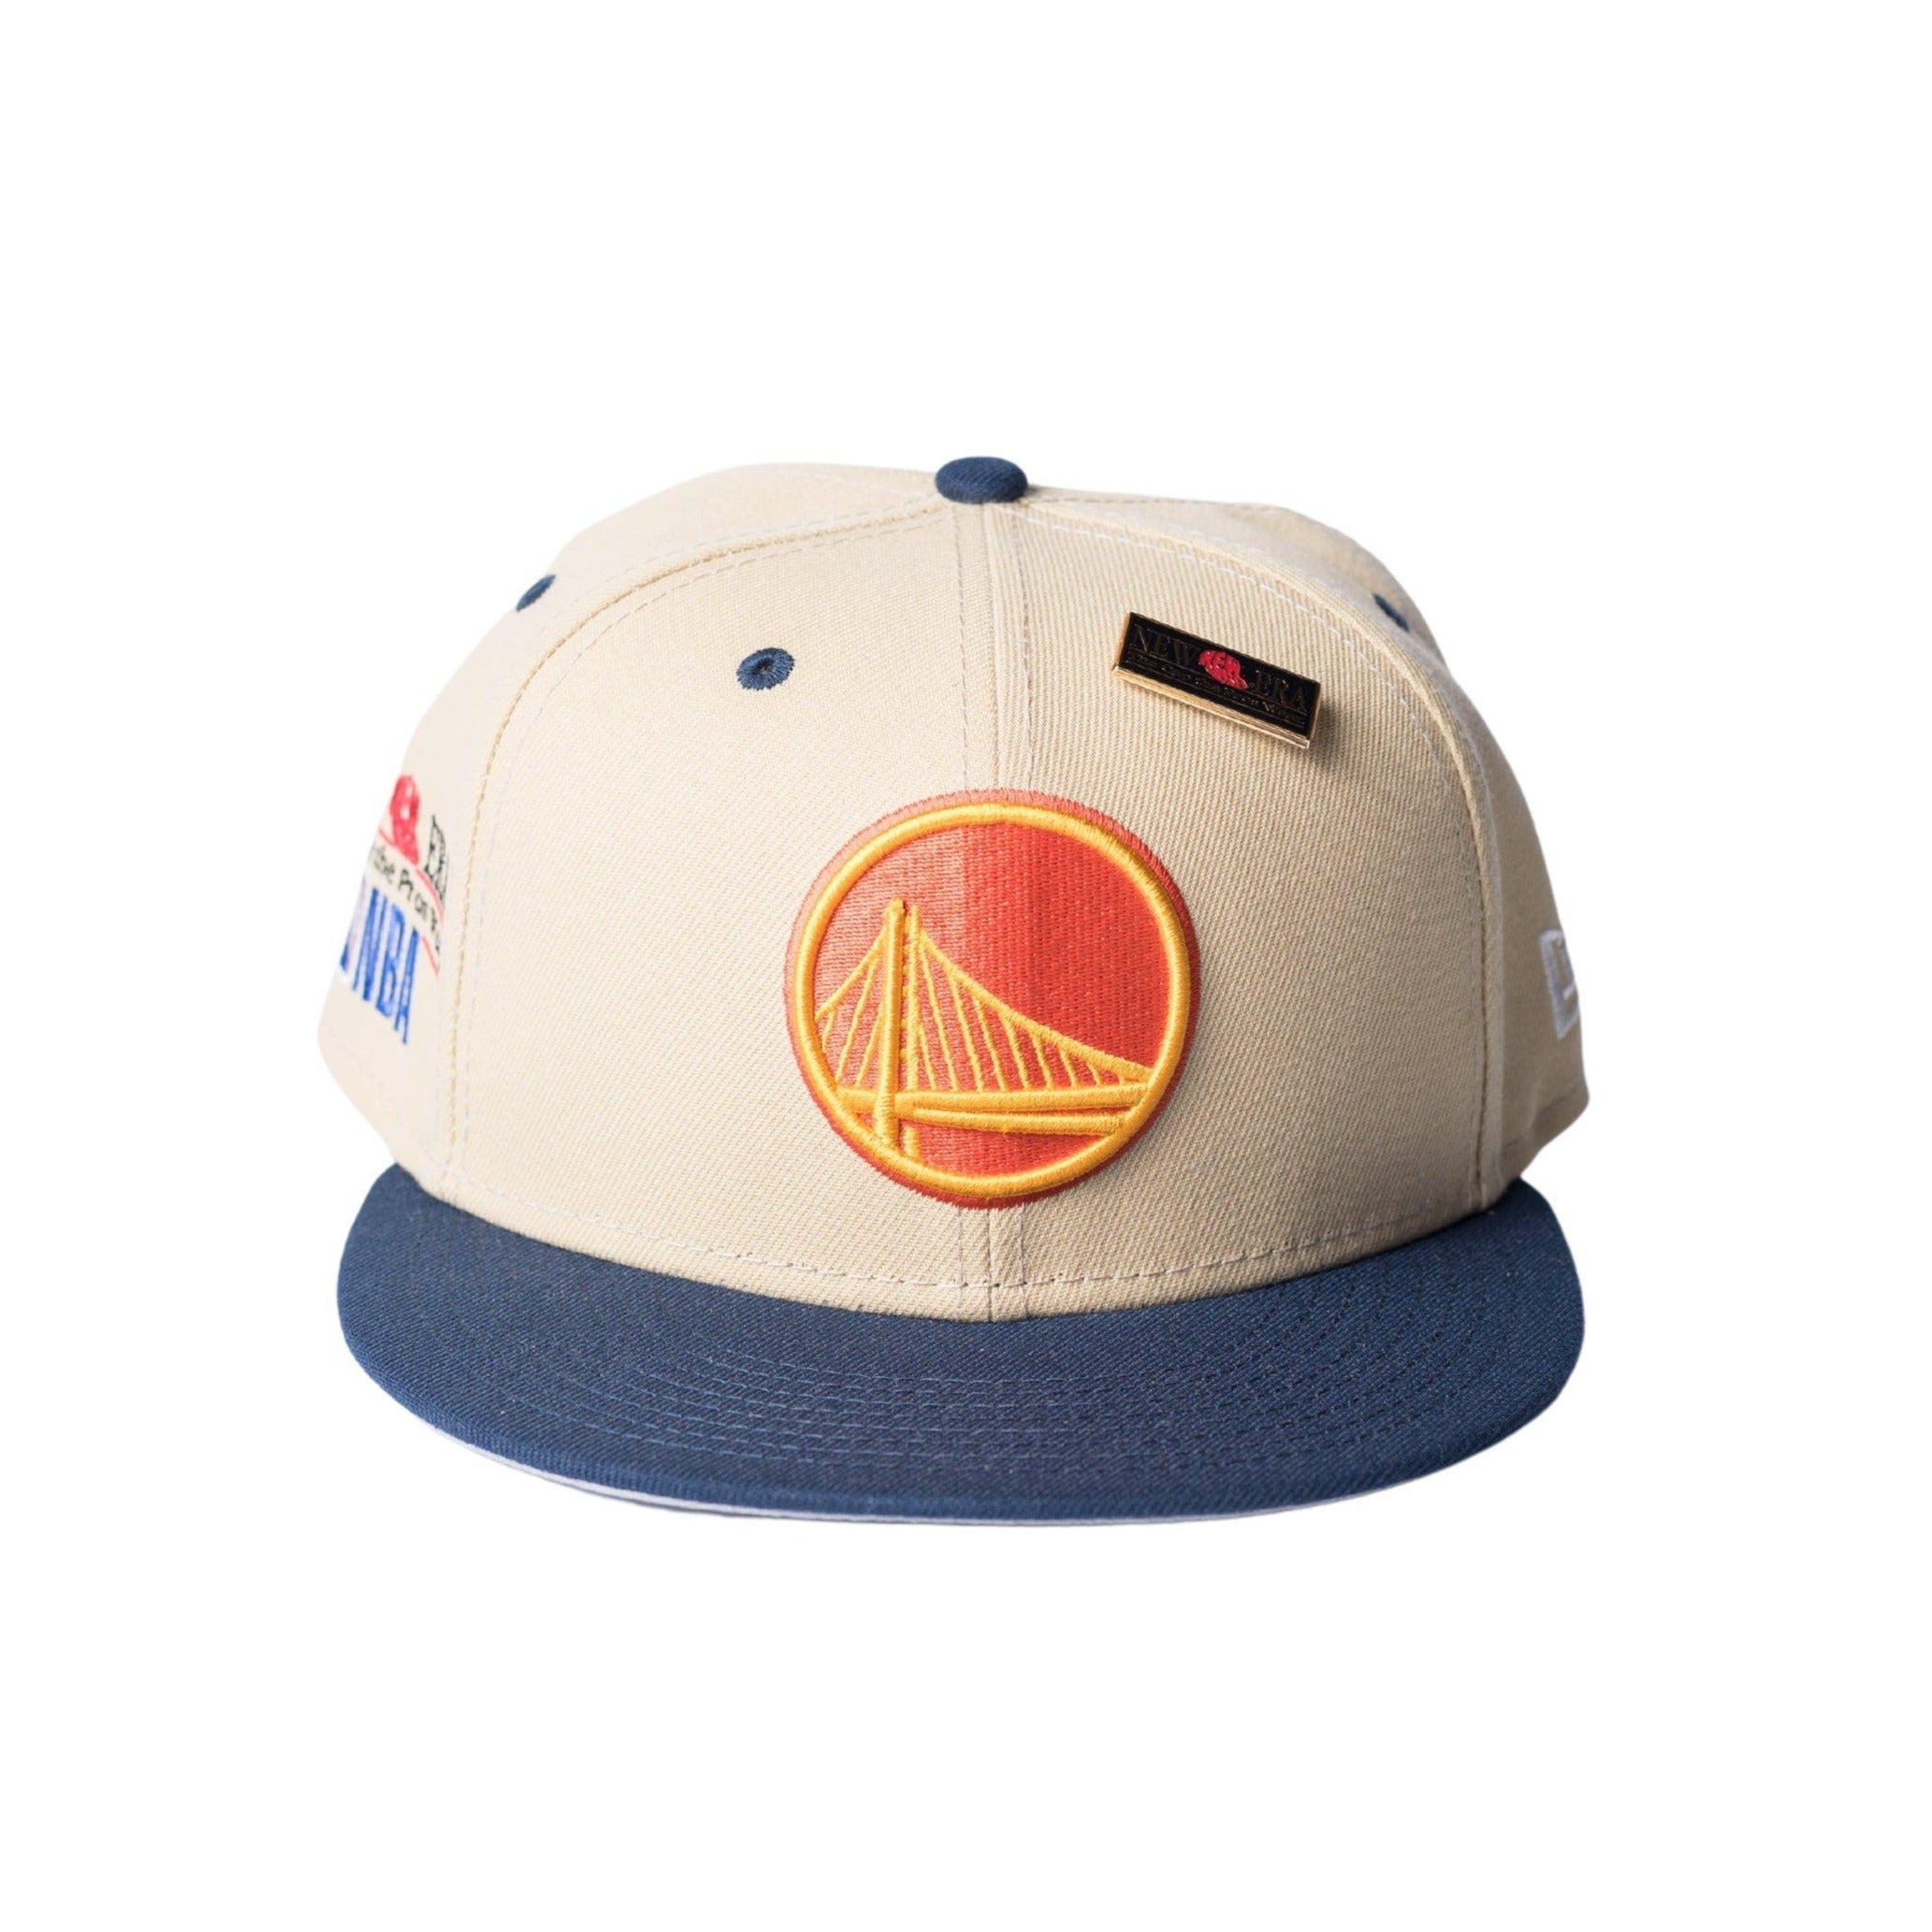 Golden State Warriors Pro Fitted Cap